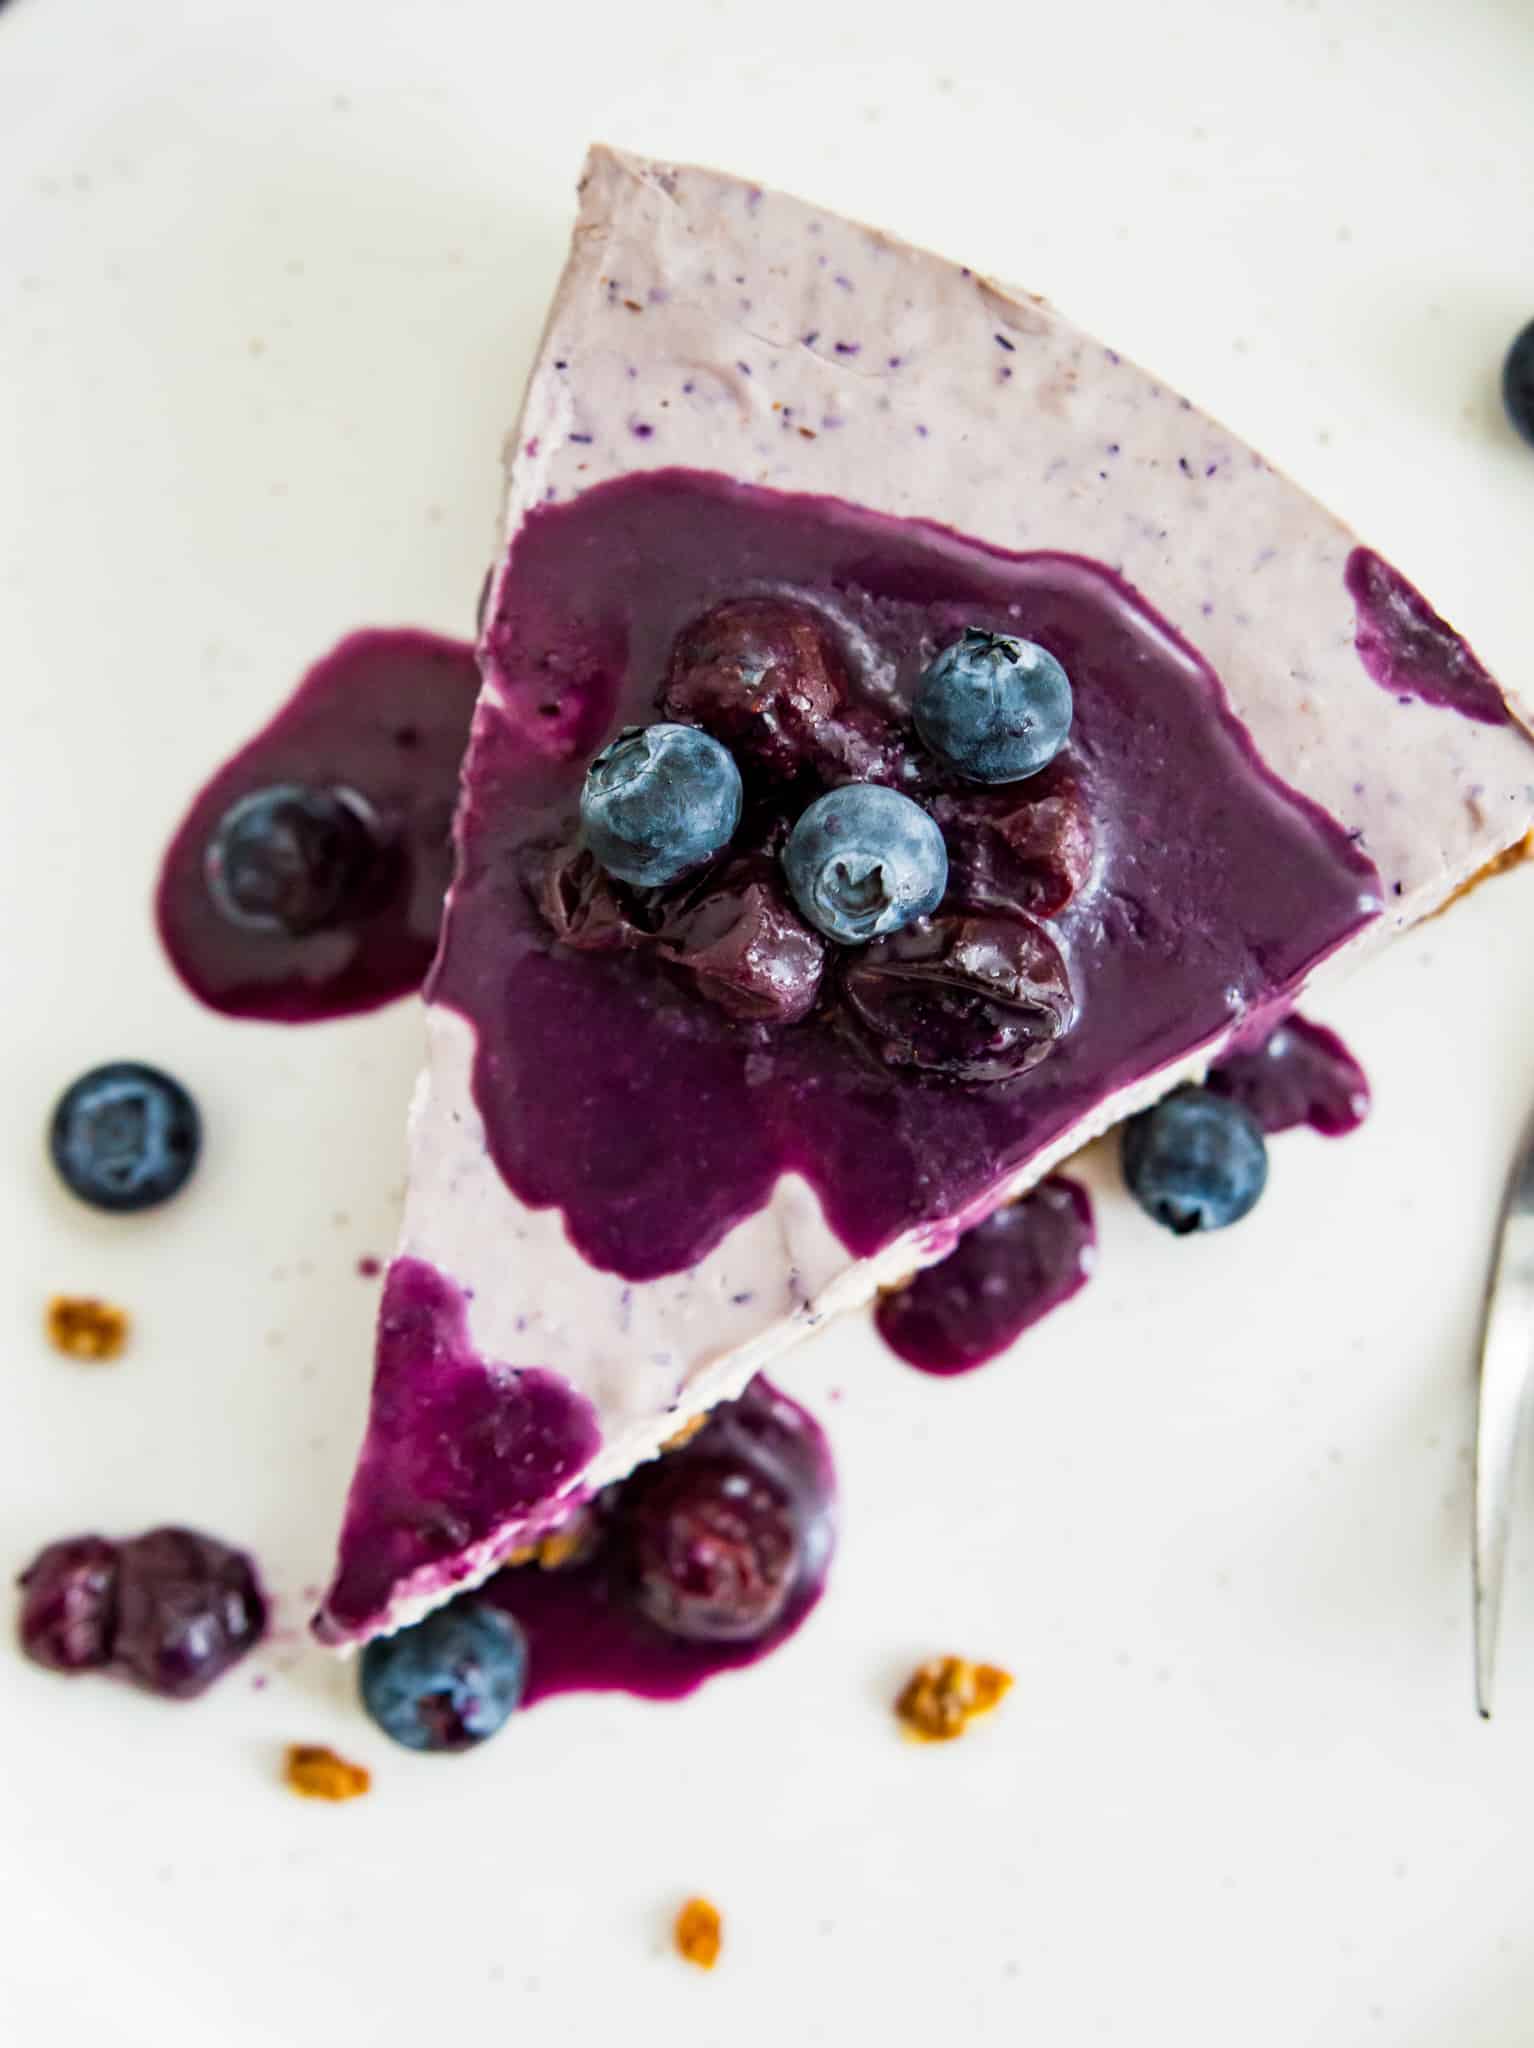 Overhead shot of a slice of cheesecake topped with fresh blueberries and blueberry sauce